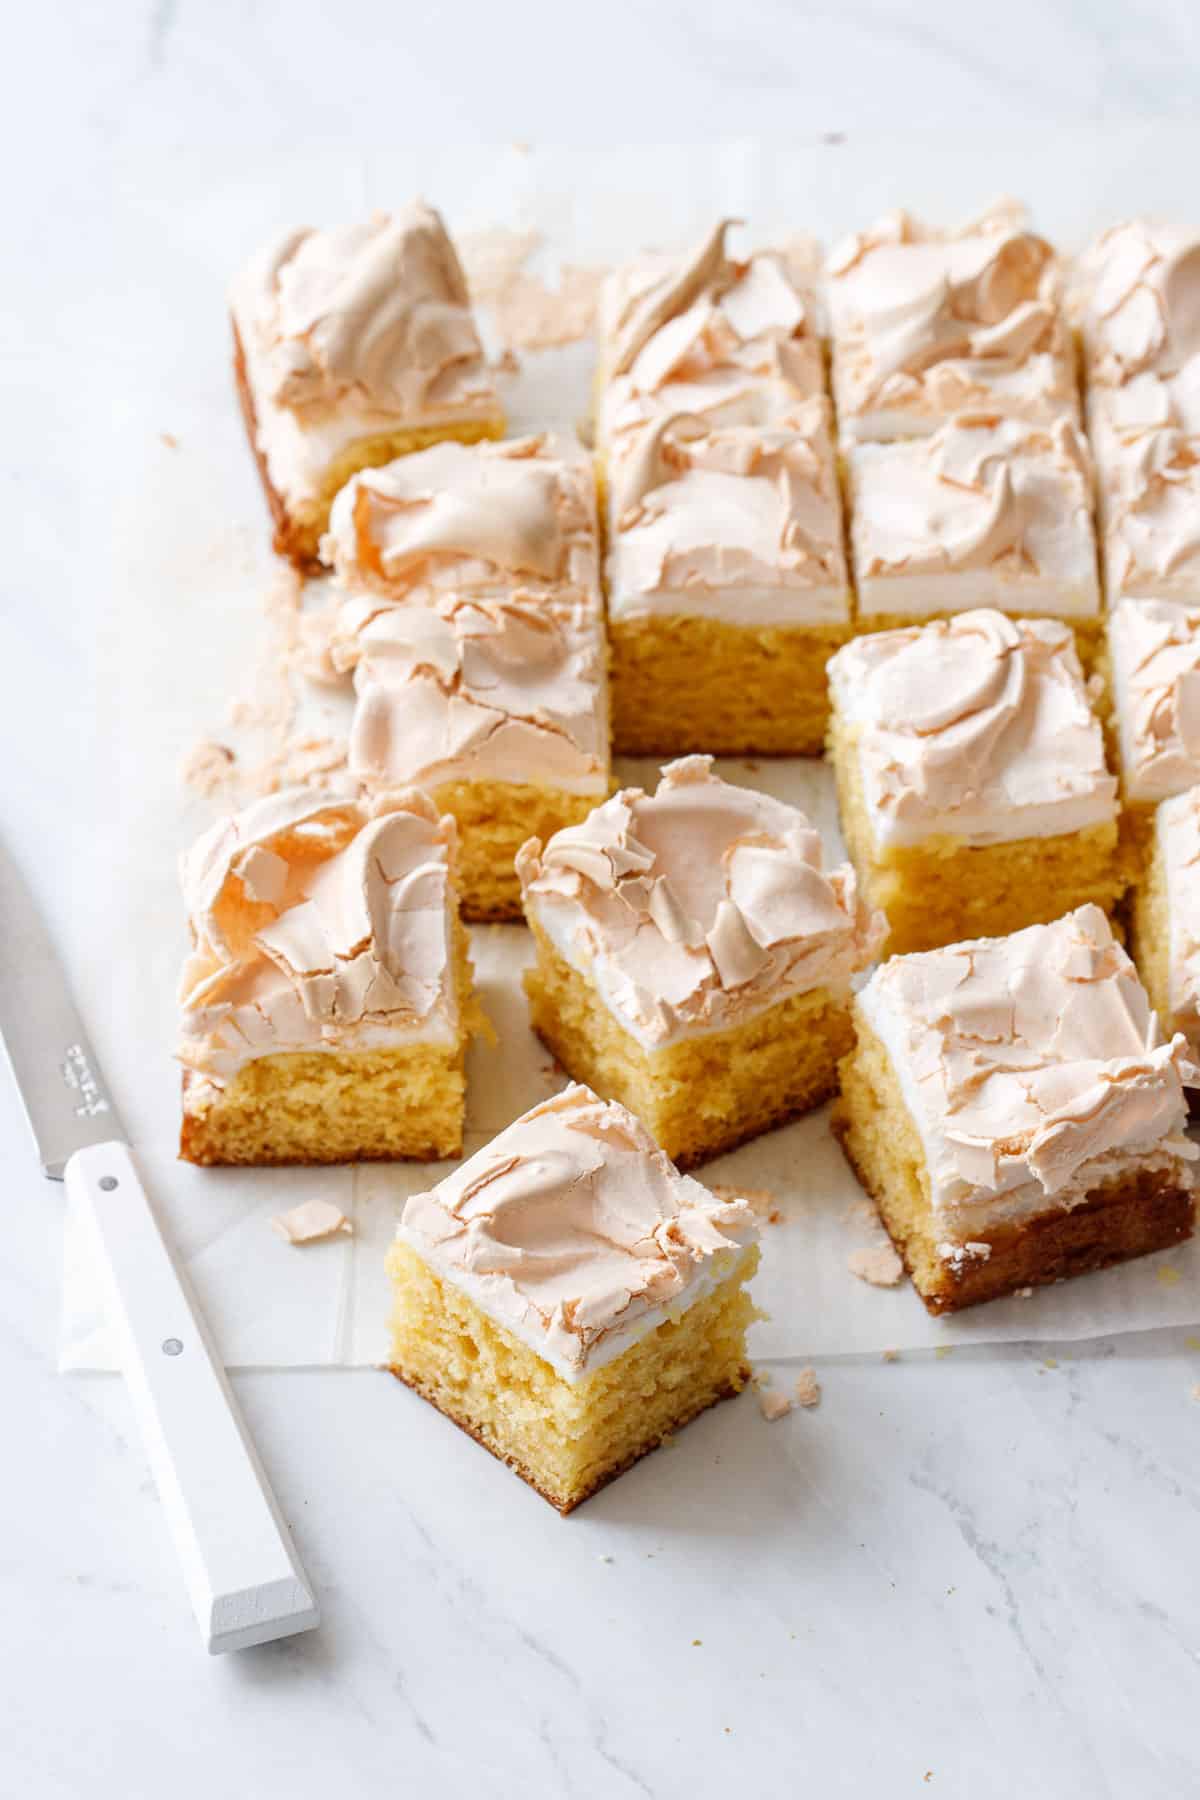 Lemon Meringue Butter Cake cut into squares, arranged on a piece of parchment paper with a small white knife.